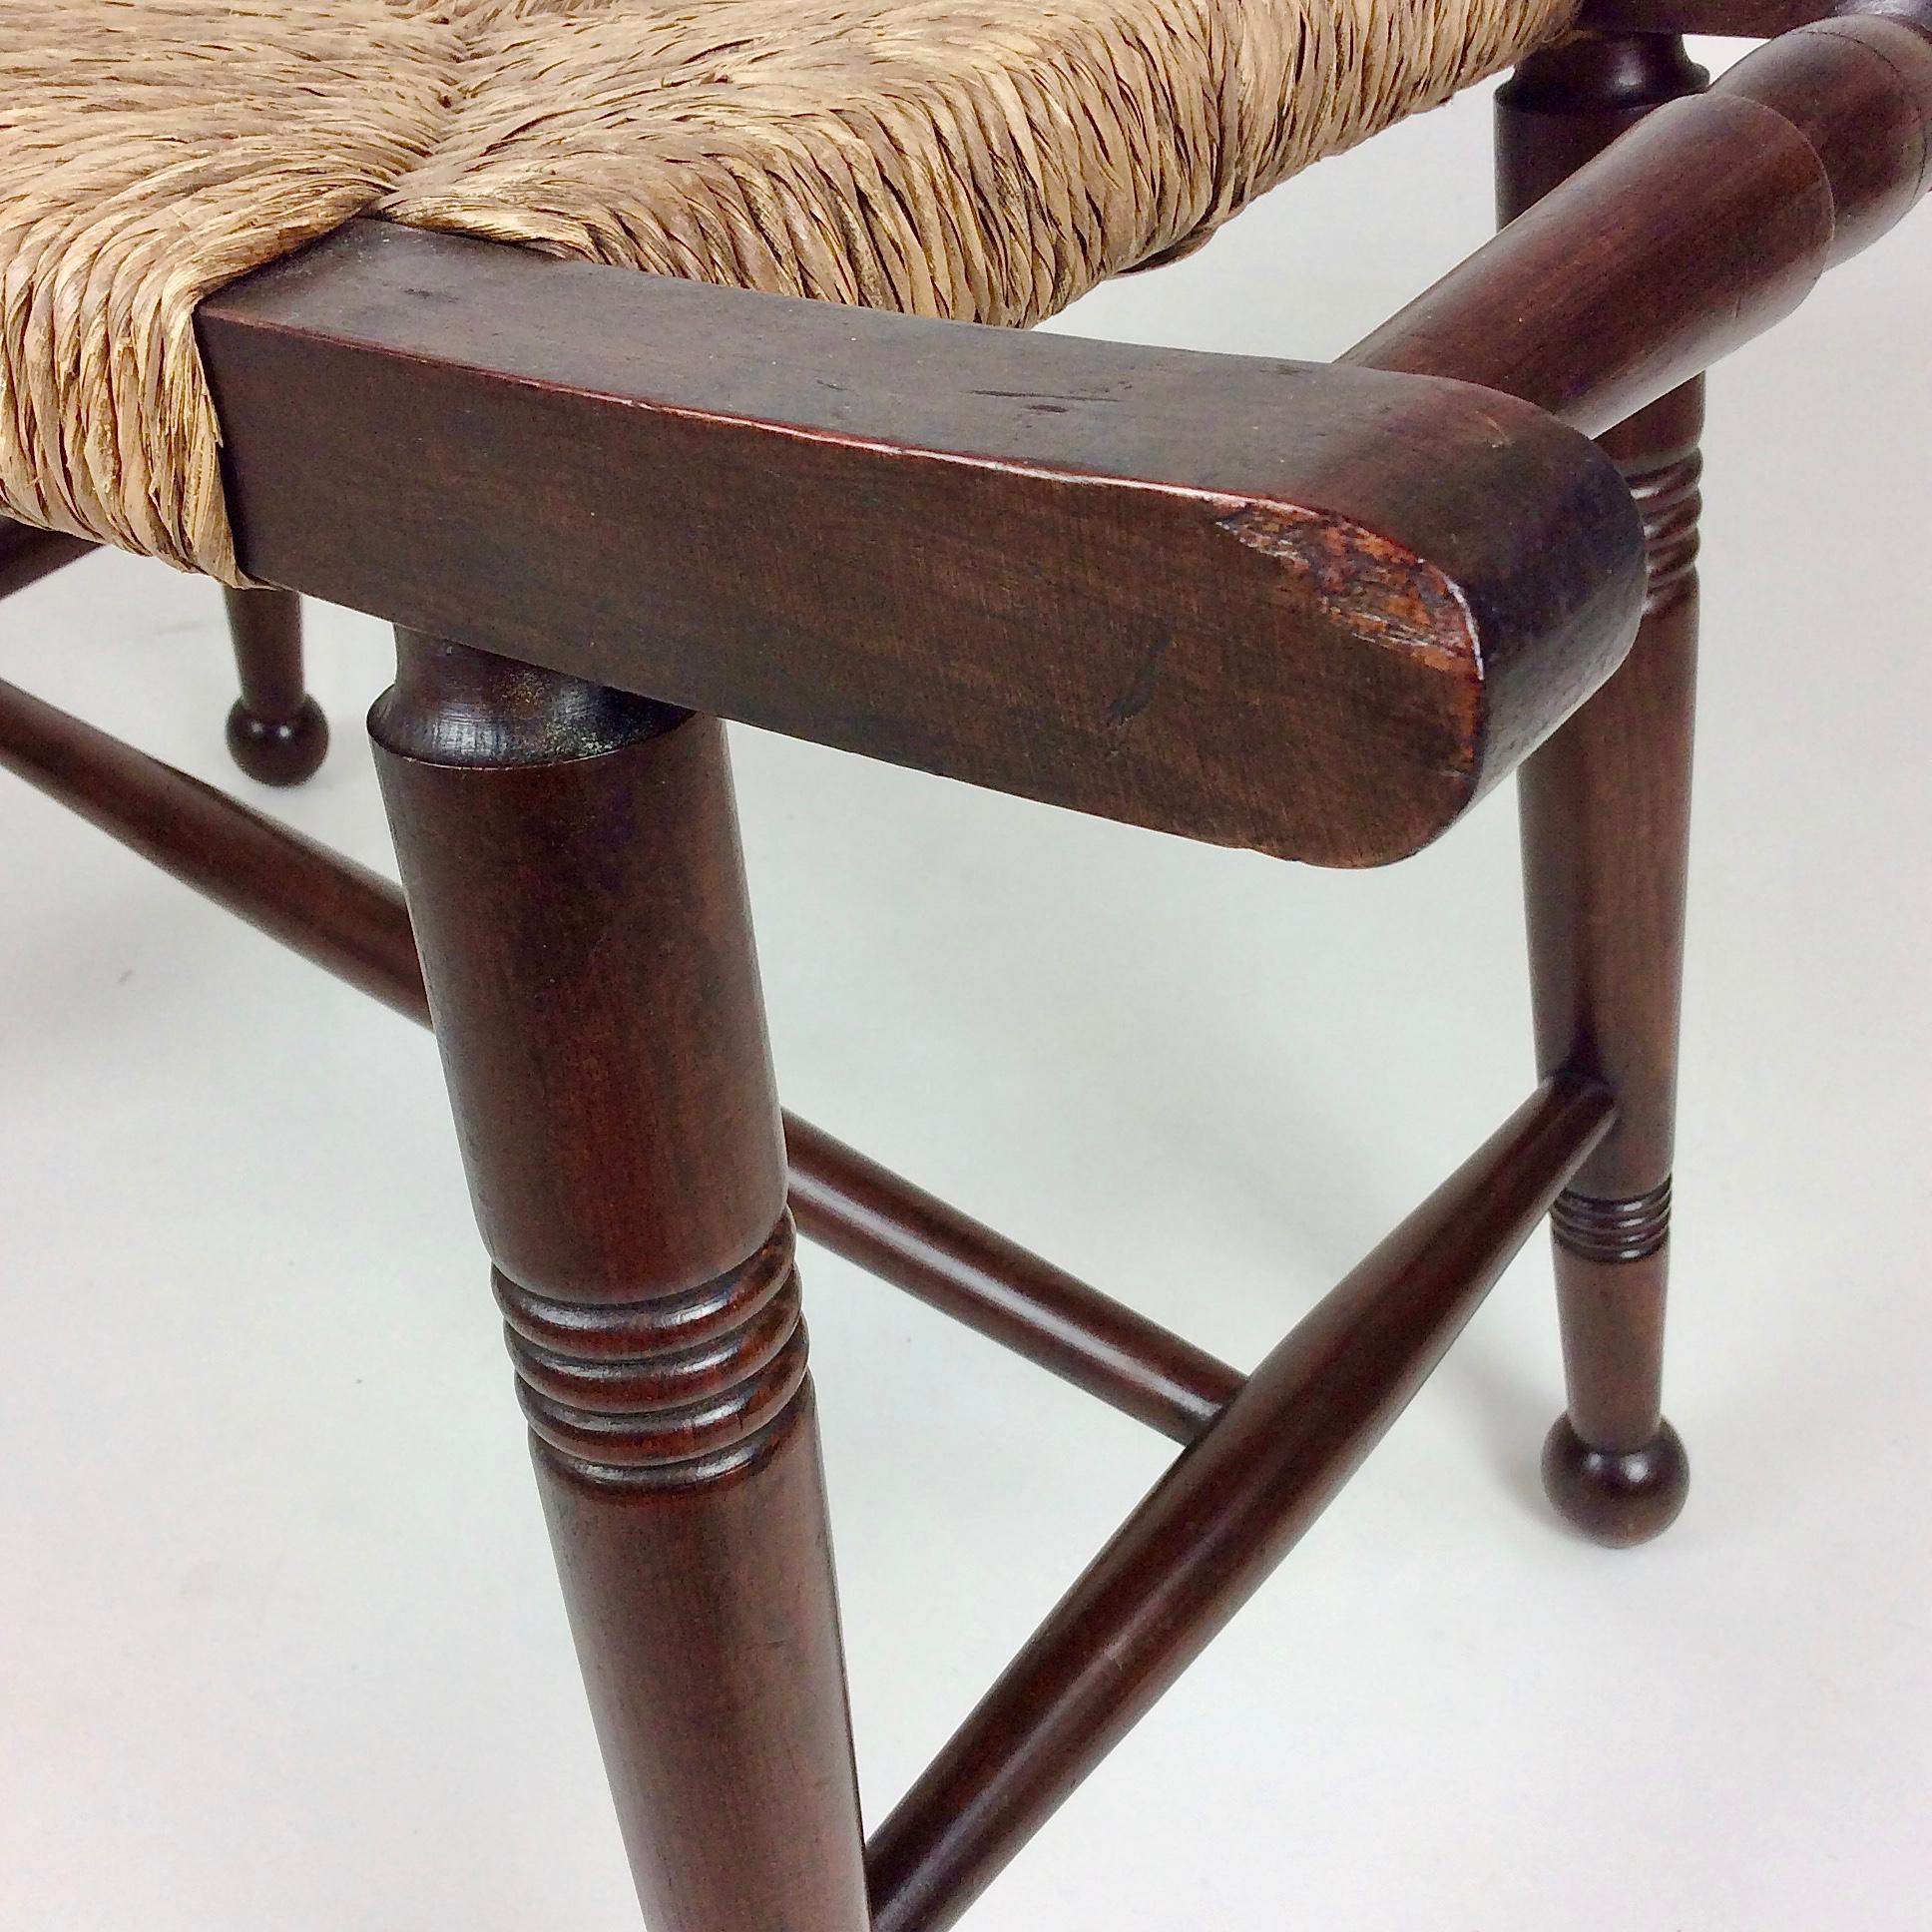 Arts & Crafts Wood and Straw Stool, Early 20th Century, United Kingdom For Sale 1